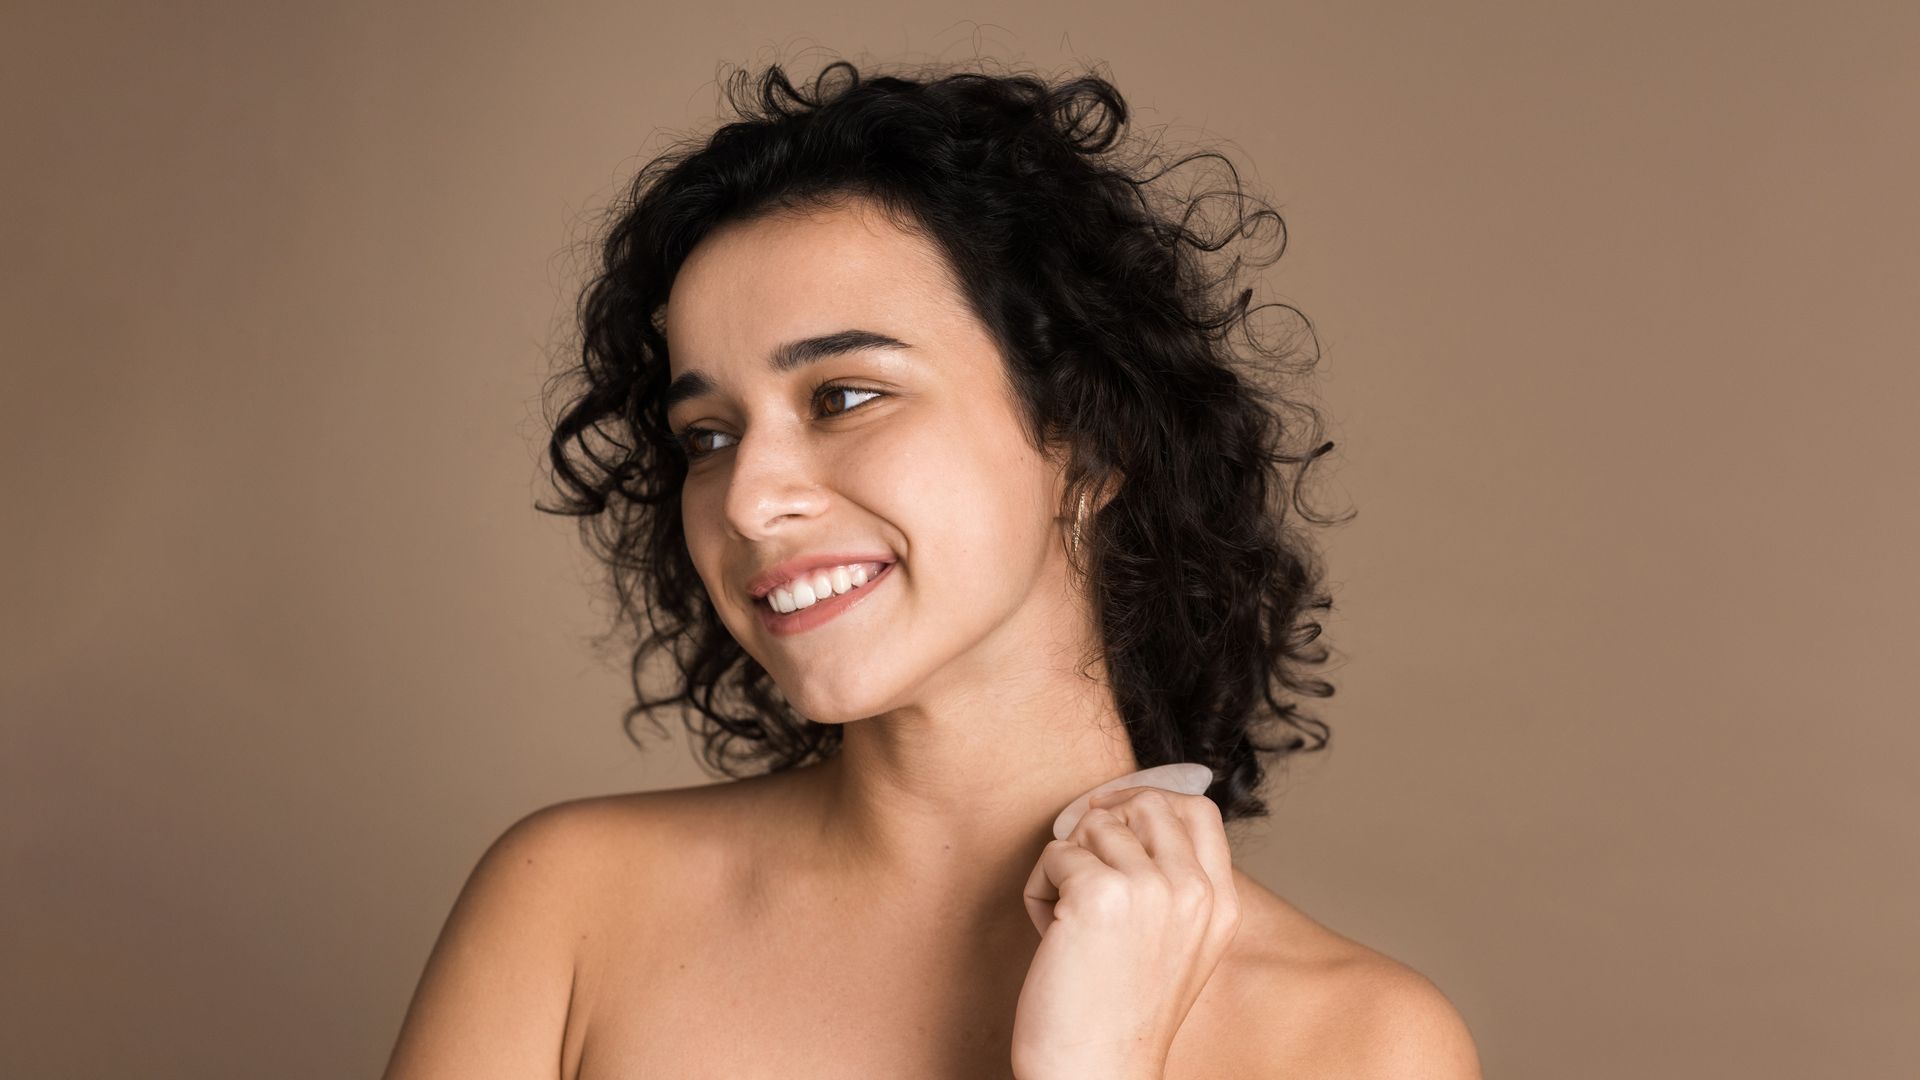 a woman with curly hair is smiling and holding a white object to her neck